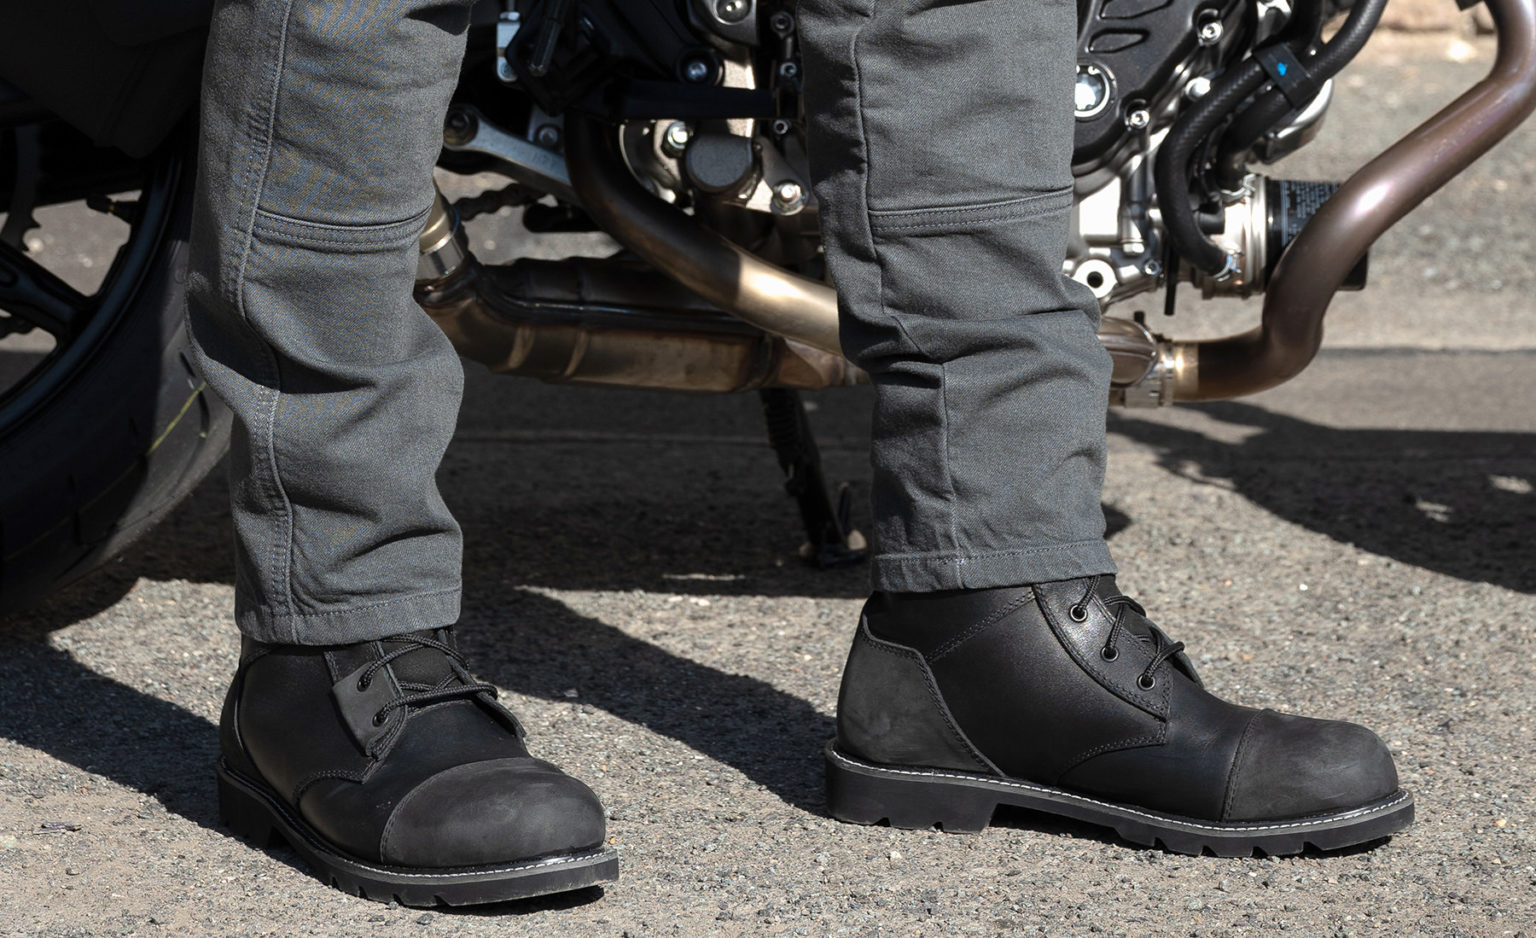 The New Merlin Bandit D3O Waterproof Motorcycle Boots